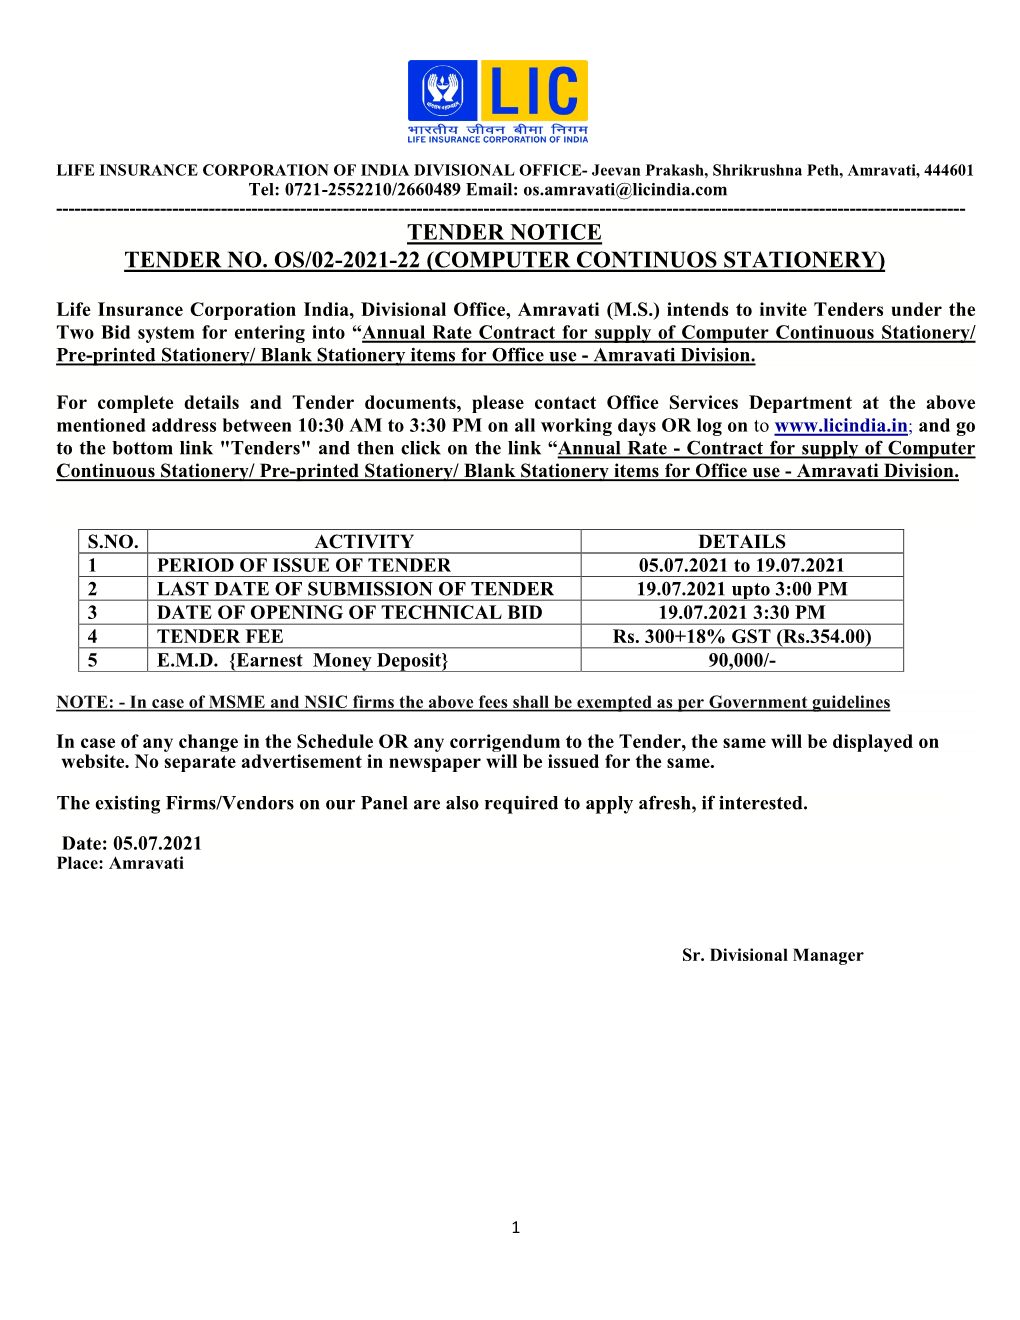 Tender Notice Tender No. Os/02-2021-22 (Computer Continuos Stationery)